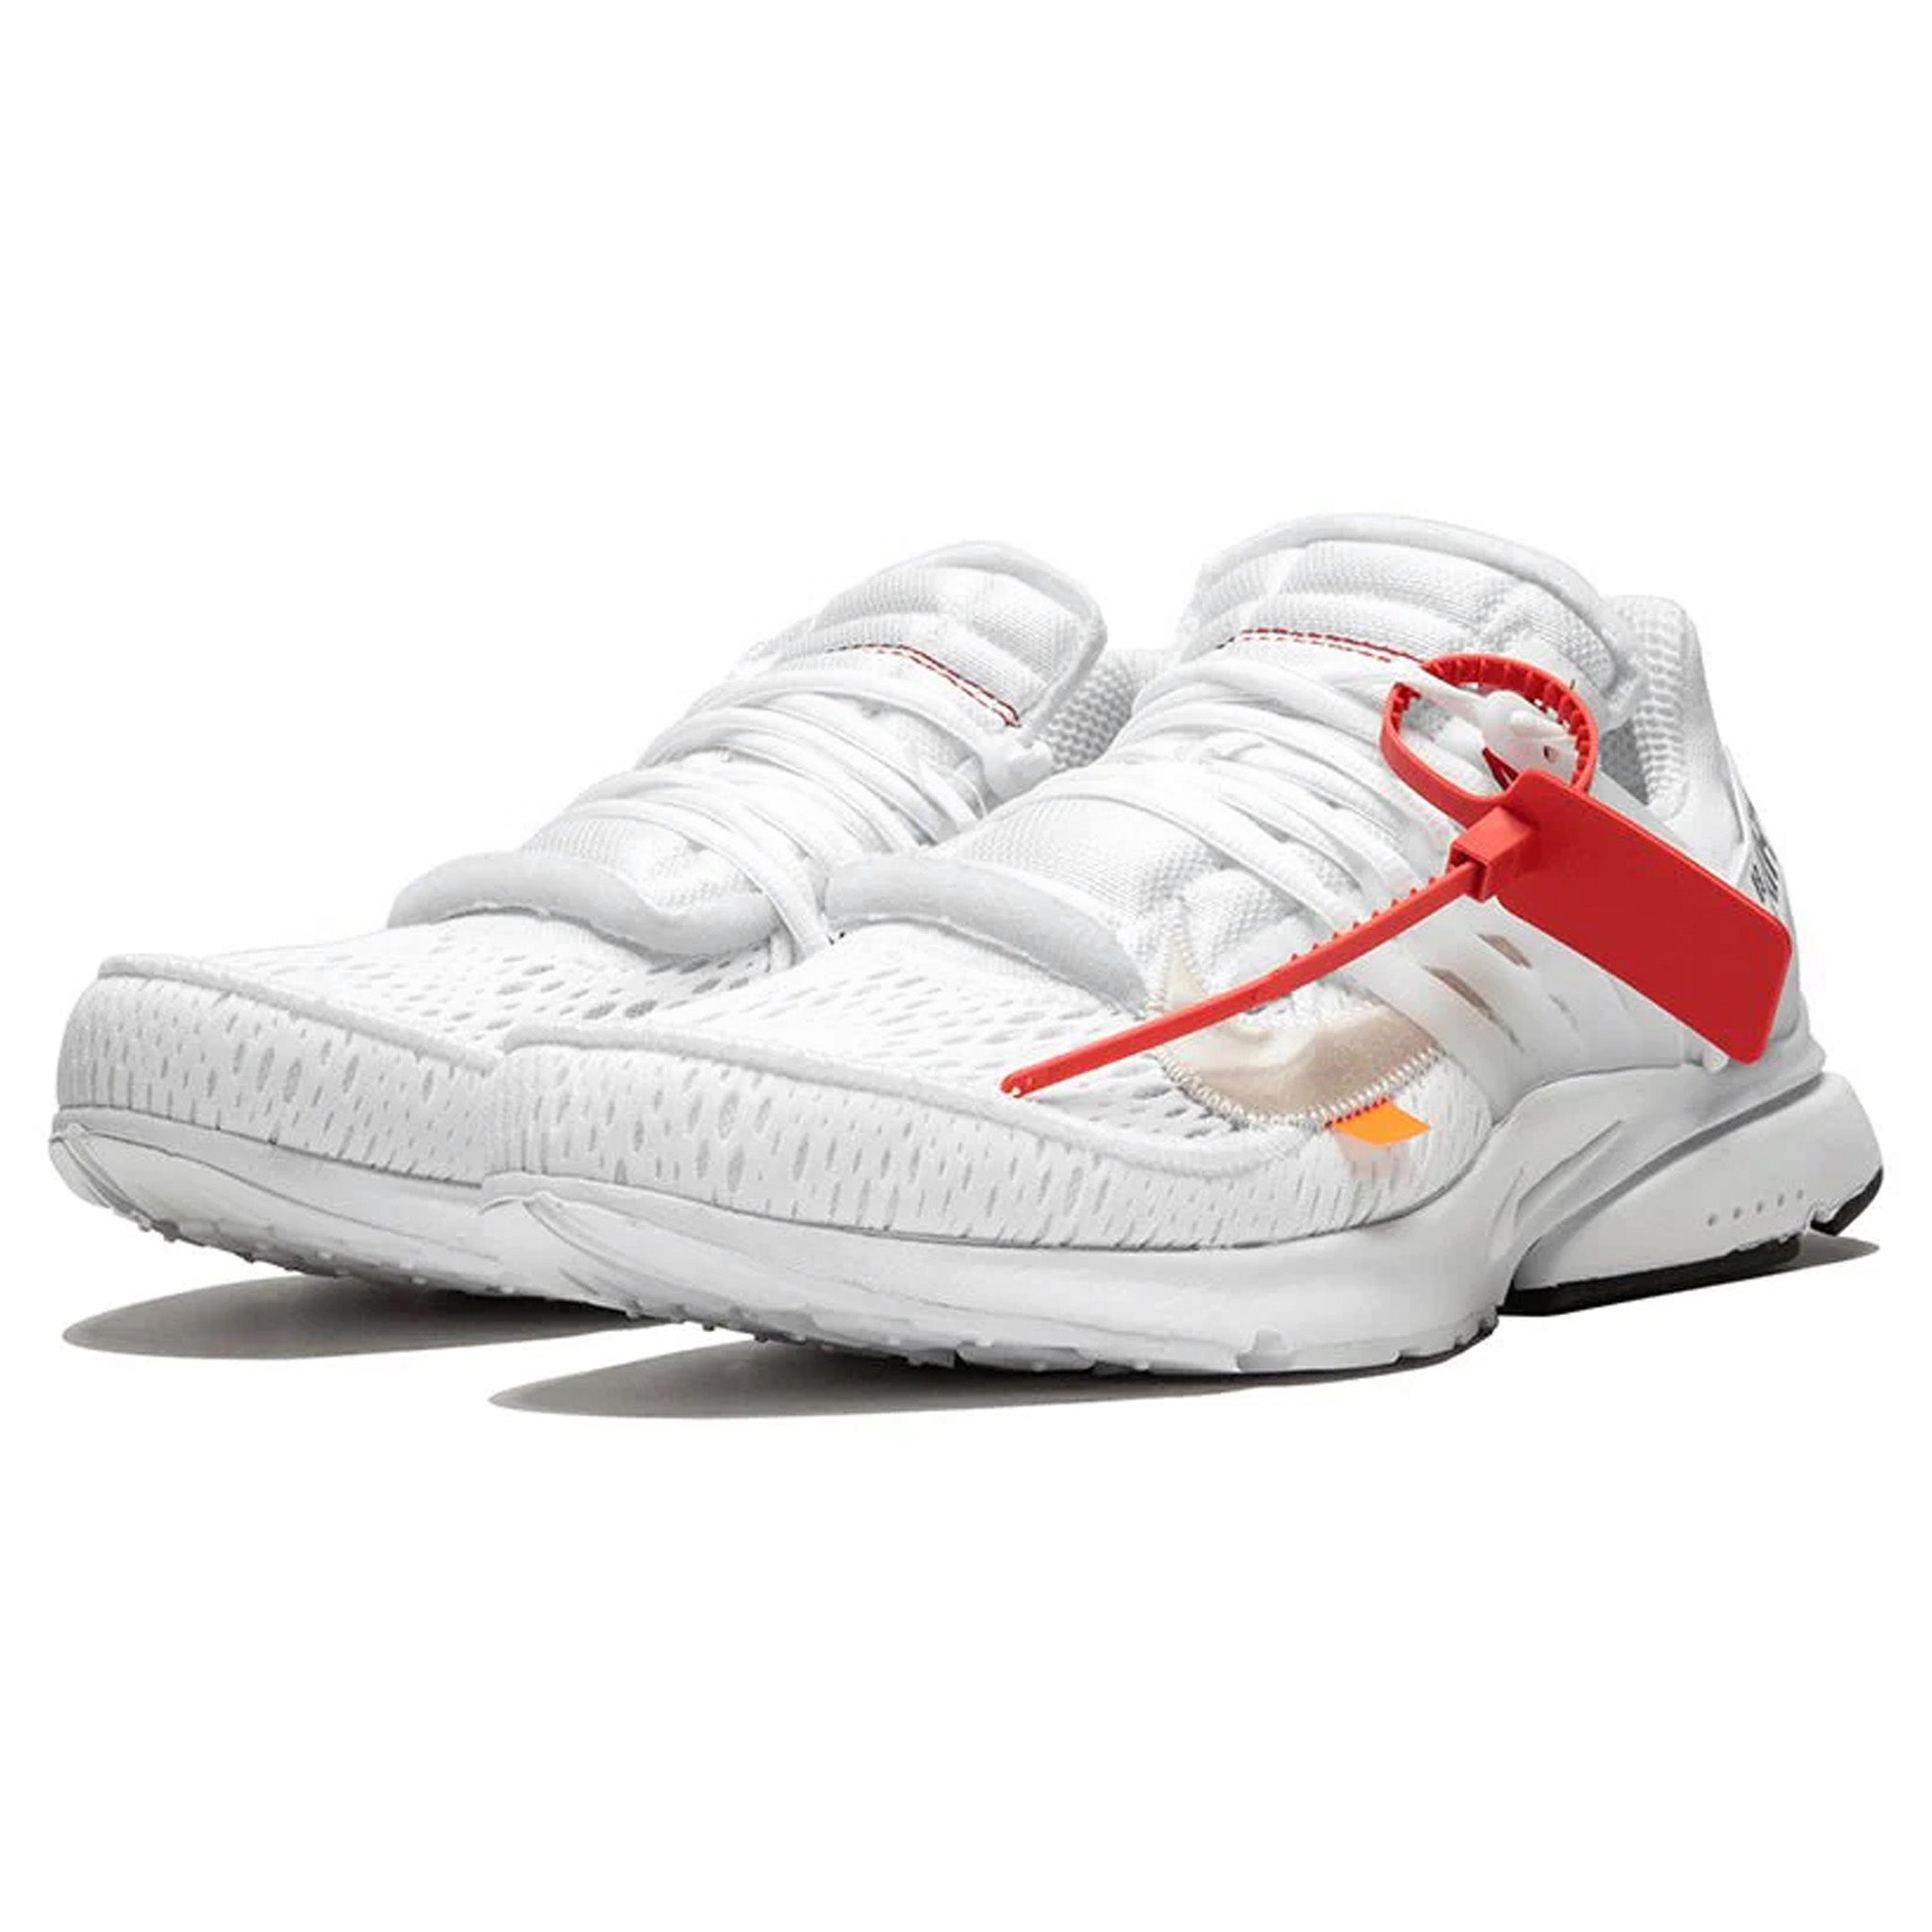 Front side view of Nike x Off White Air Presto Triple White AA3830-100